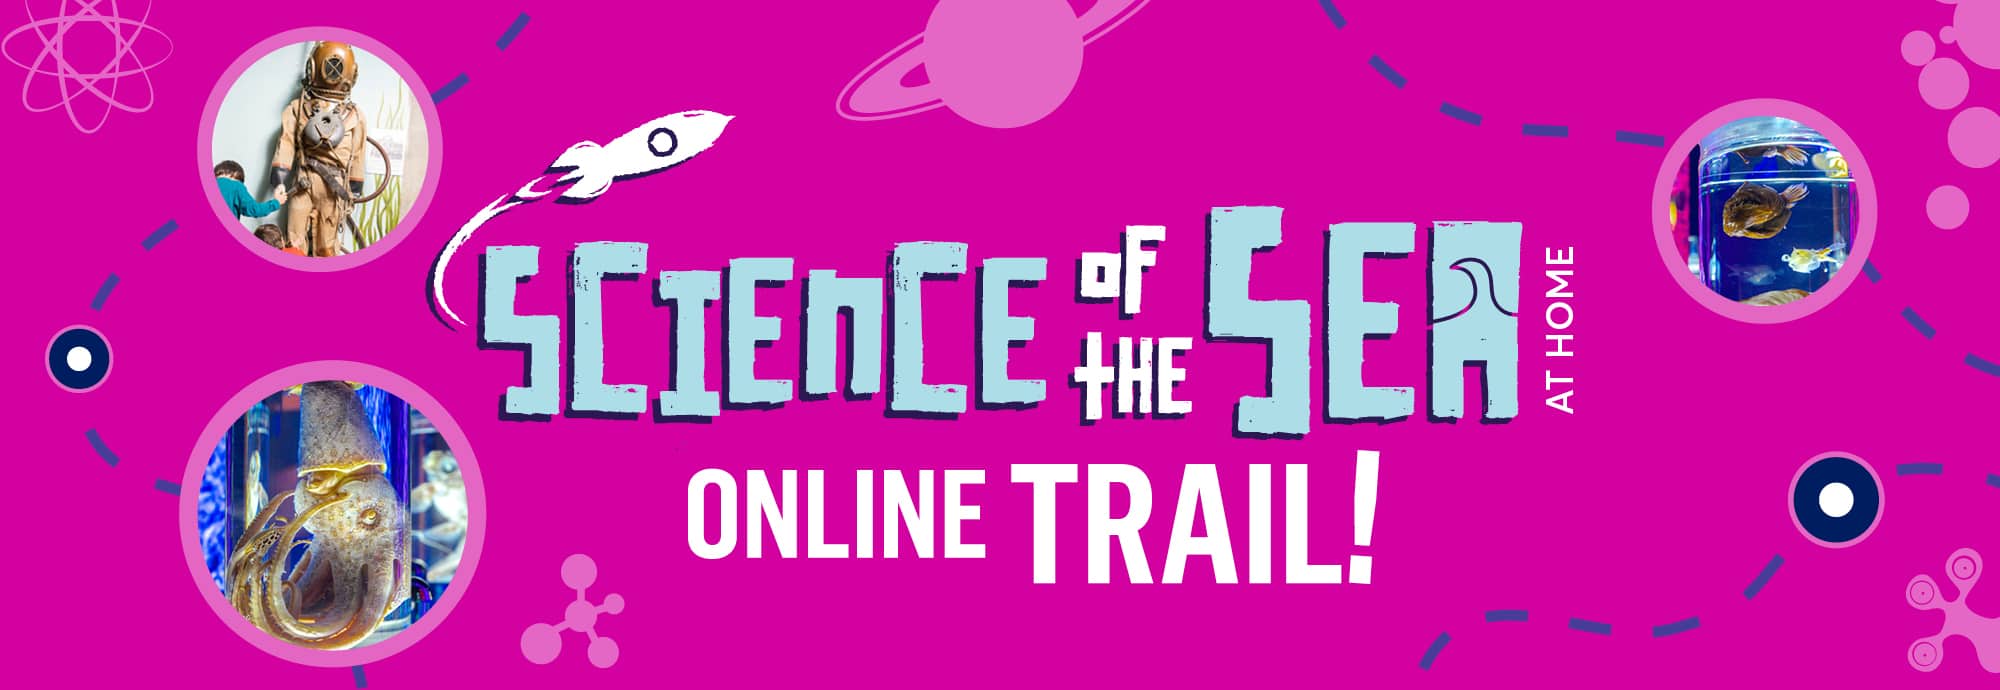 Against a pink background, text in the centre reads 'science of the sea at home' and 'online trail!'. Three photos show a diver's suit, a jar with several preserved specimens in, and a close-up of a preserved vampire squid.